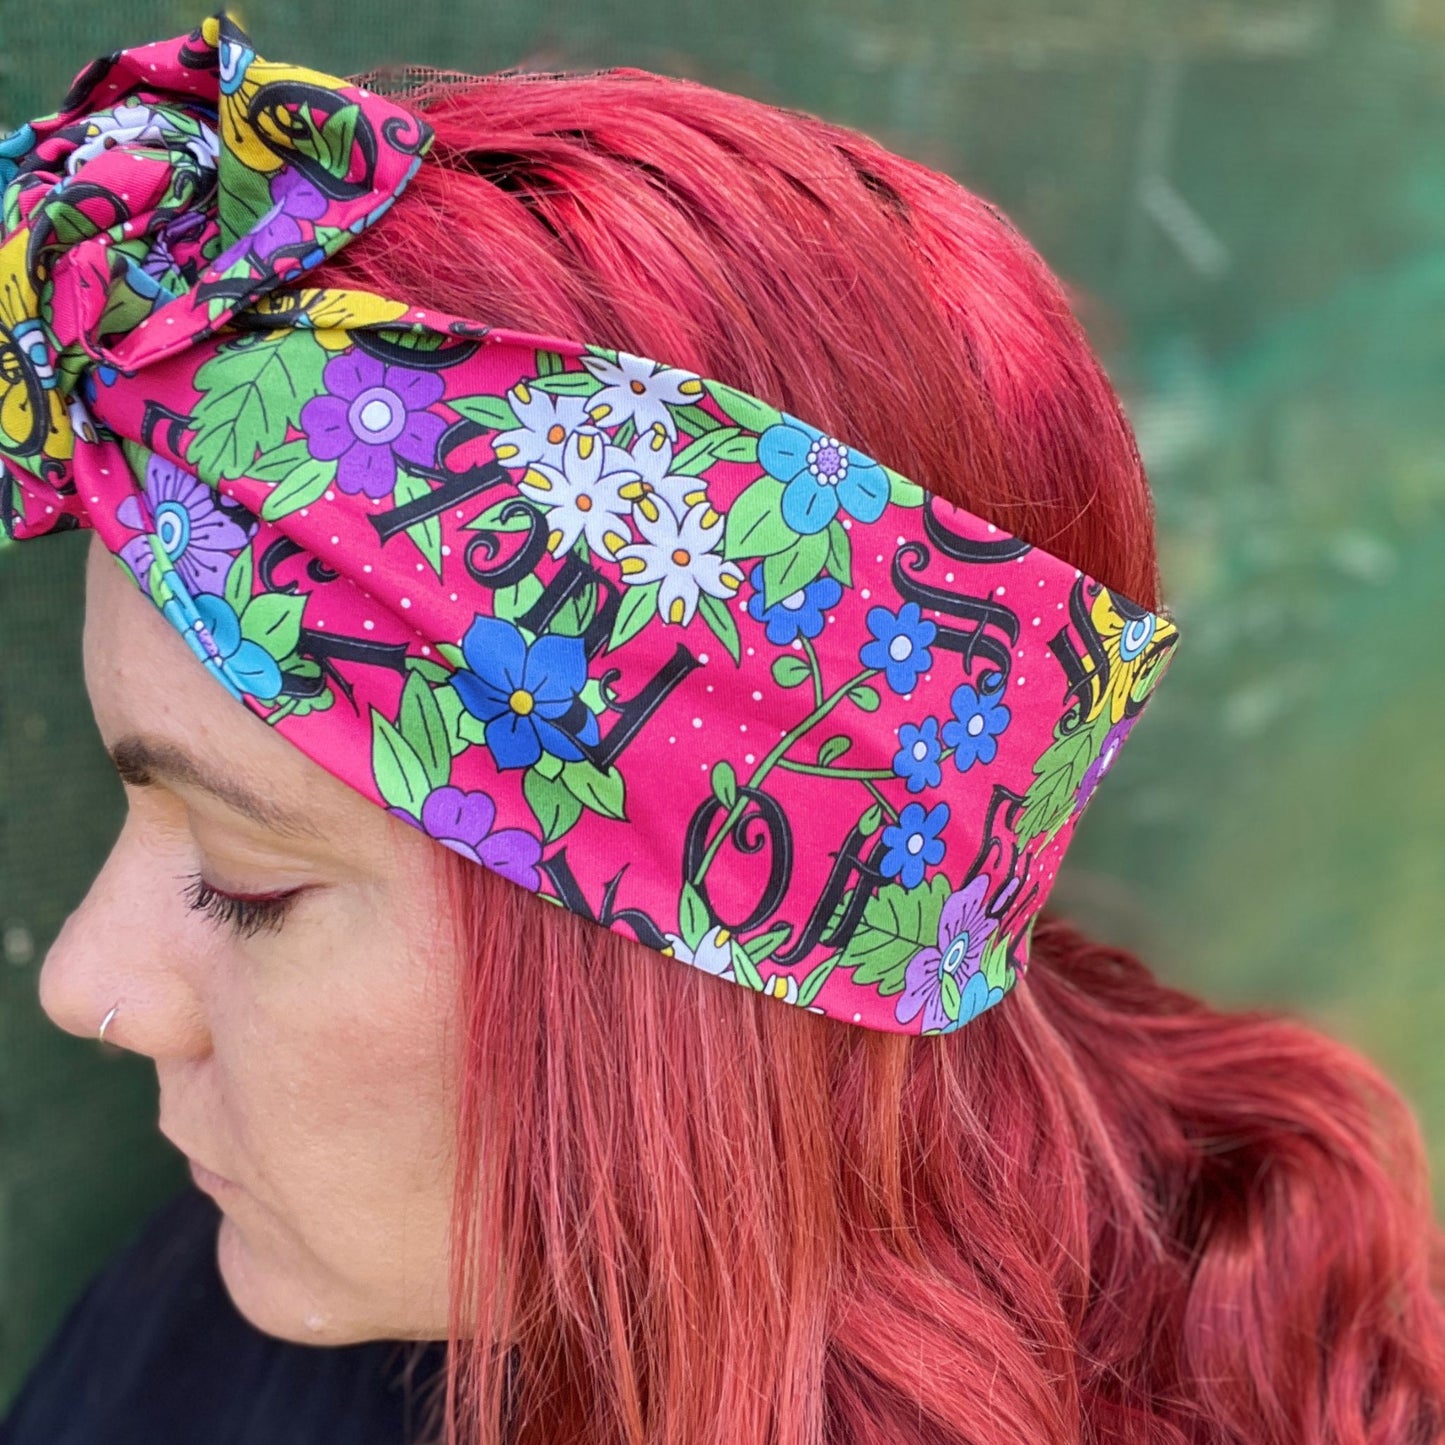 The headwrap boasts a lively floral pattern with a mix of bright flowers and leaves on a hot pink background, interspersed with bold, playful text. It's knotted at the top, giving a touch of retro flair. 